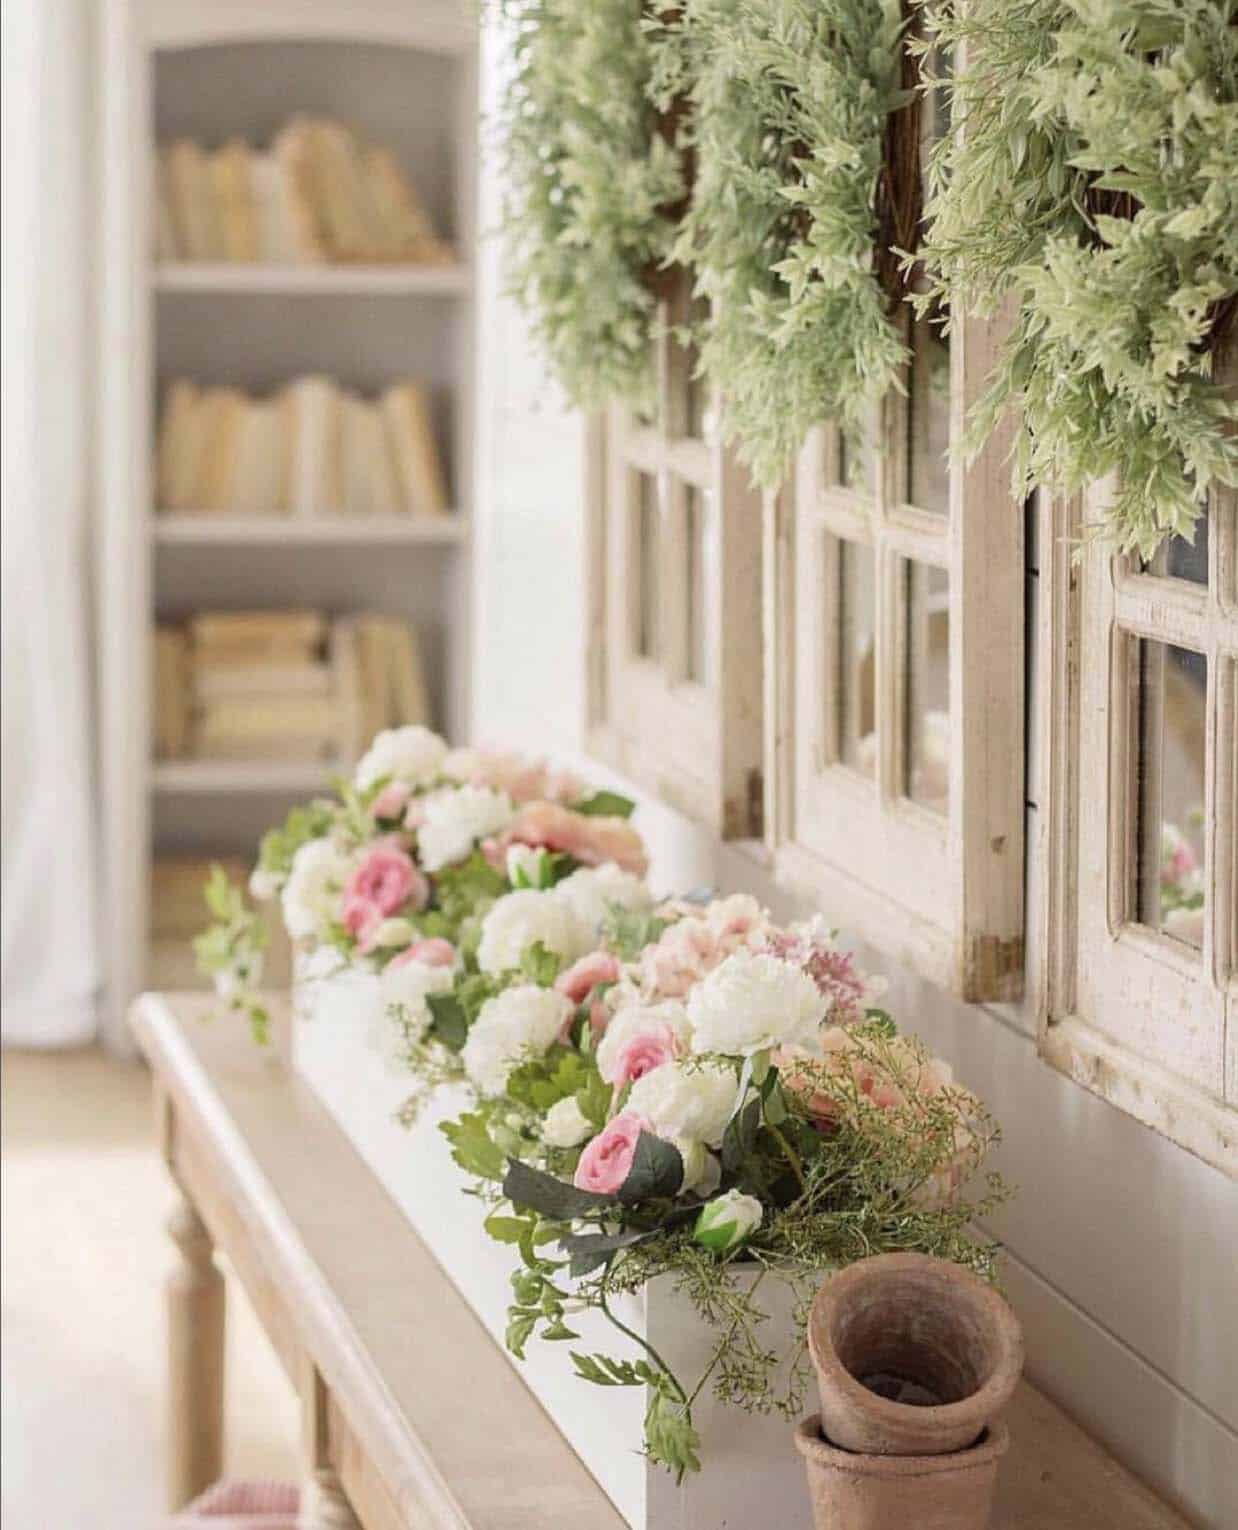 Spring-console-table-with-a-homemade-wooden-flower-box